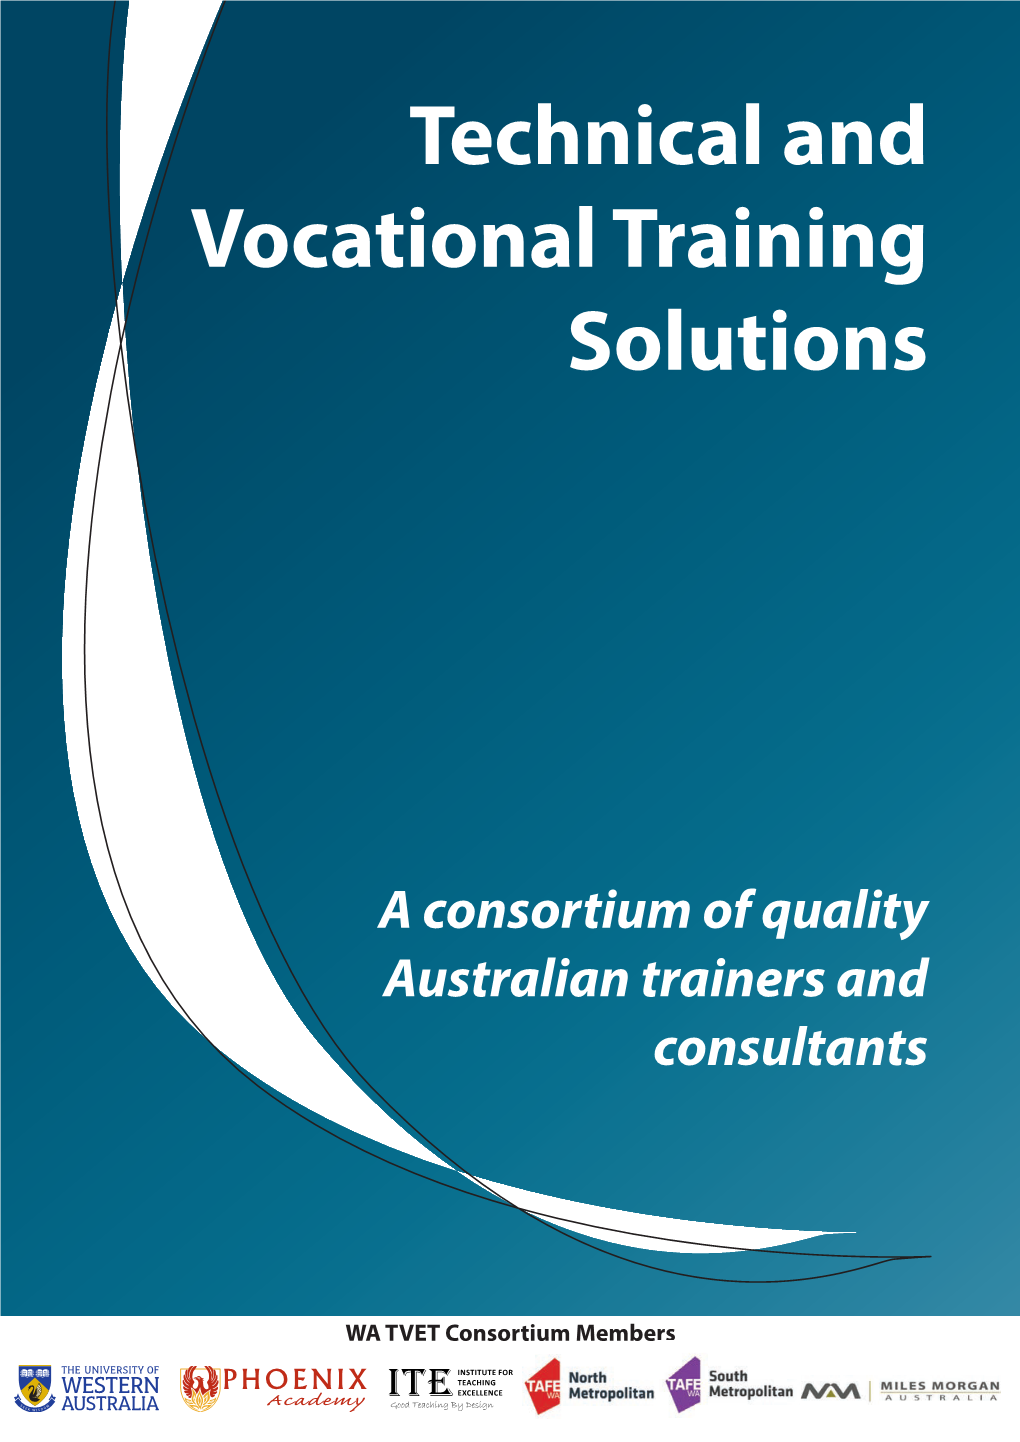 Technical and Vocational Training Solutions